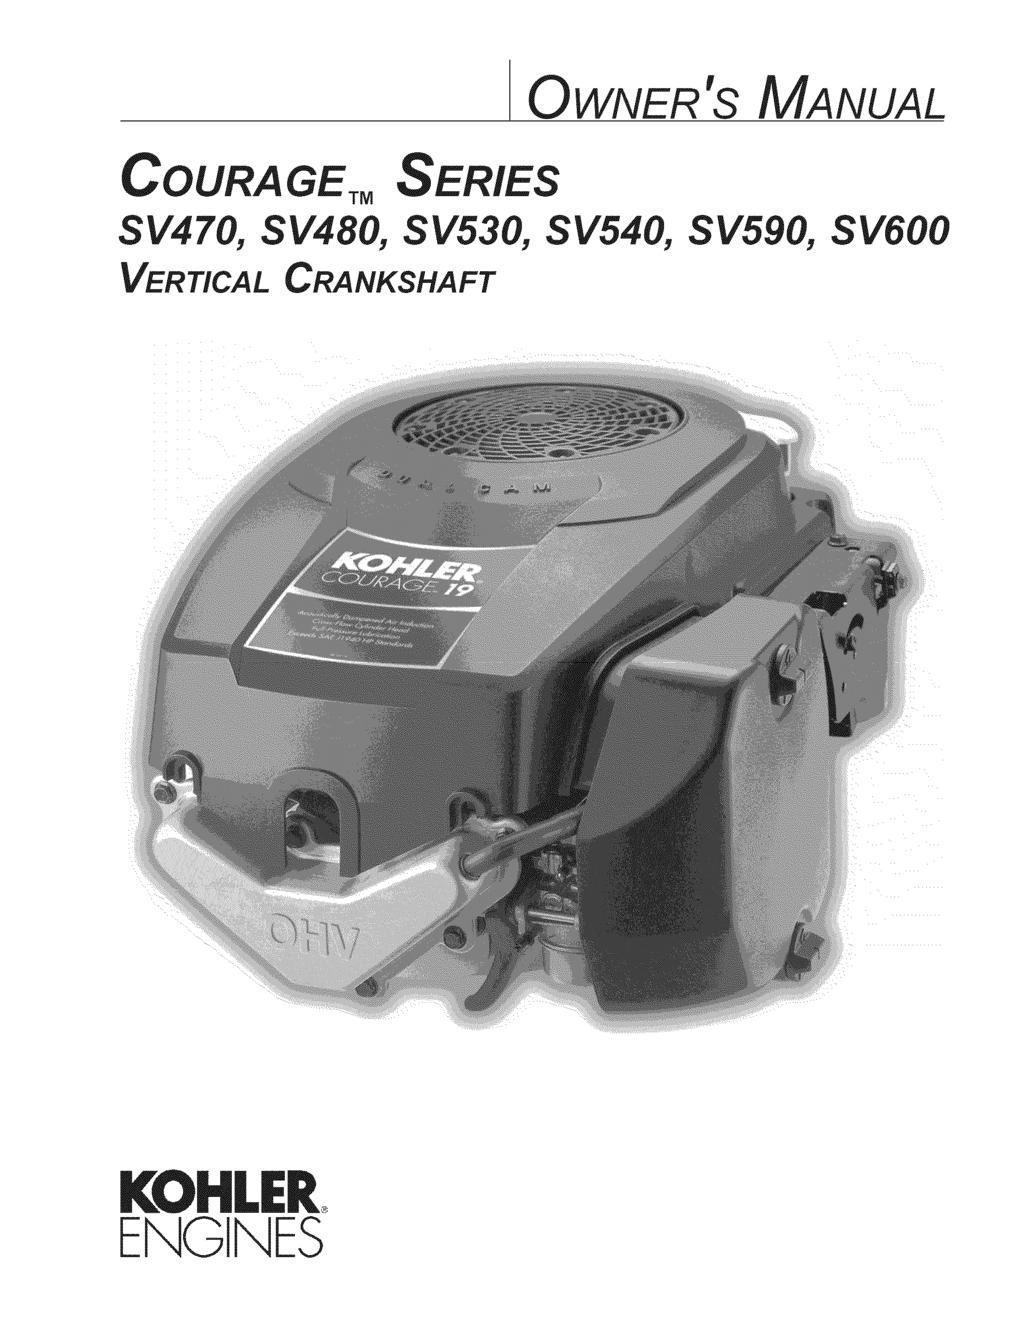 OWNER'S MANUAL COURAGE_ SERIES SV470, SV480,